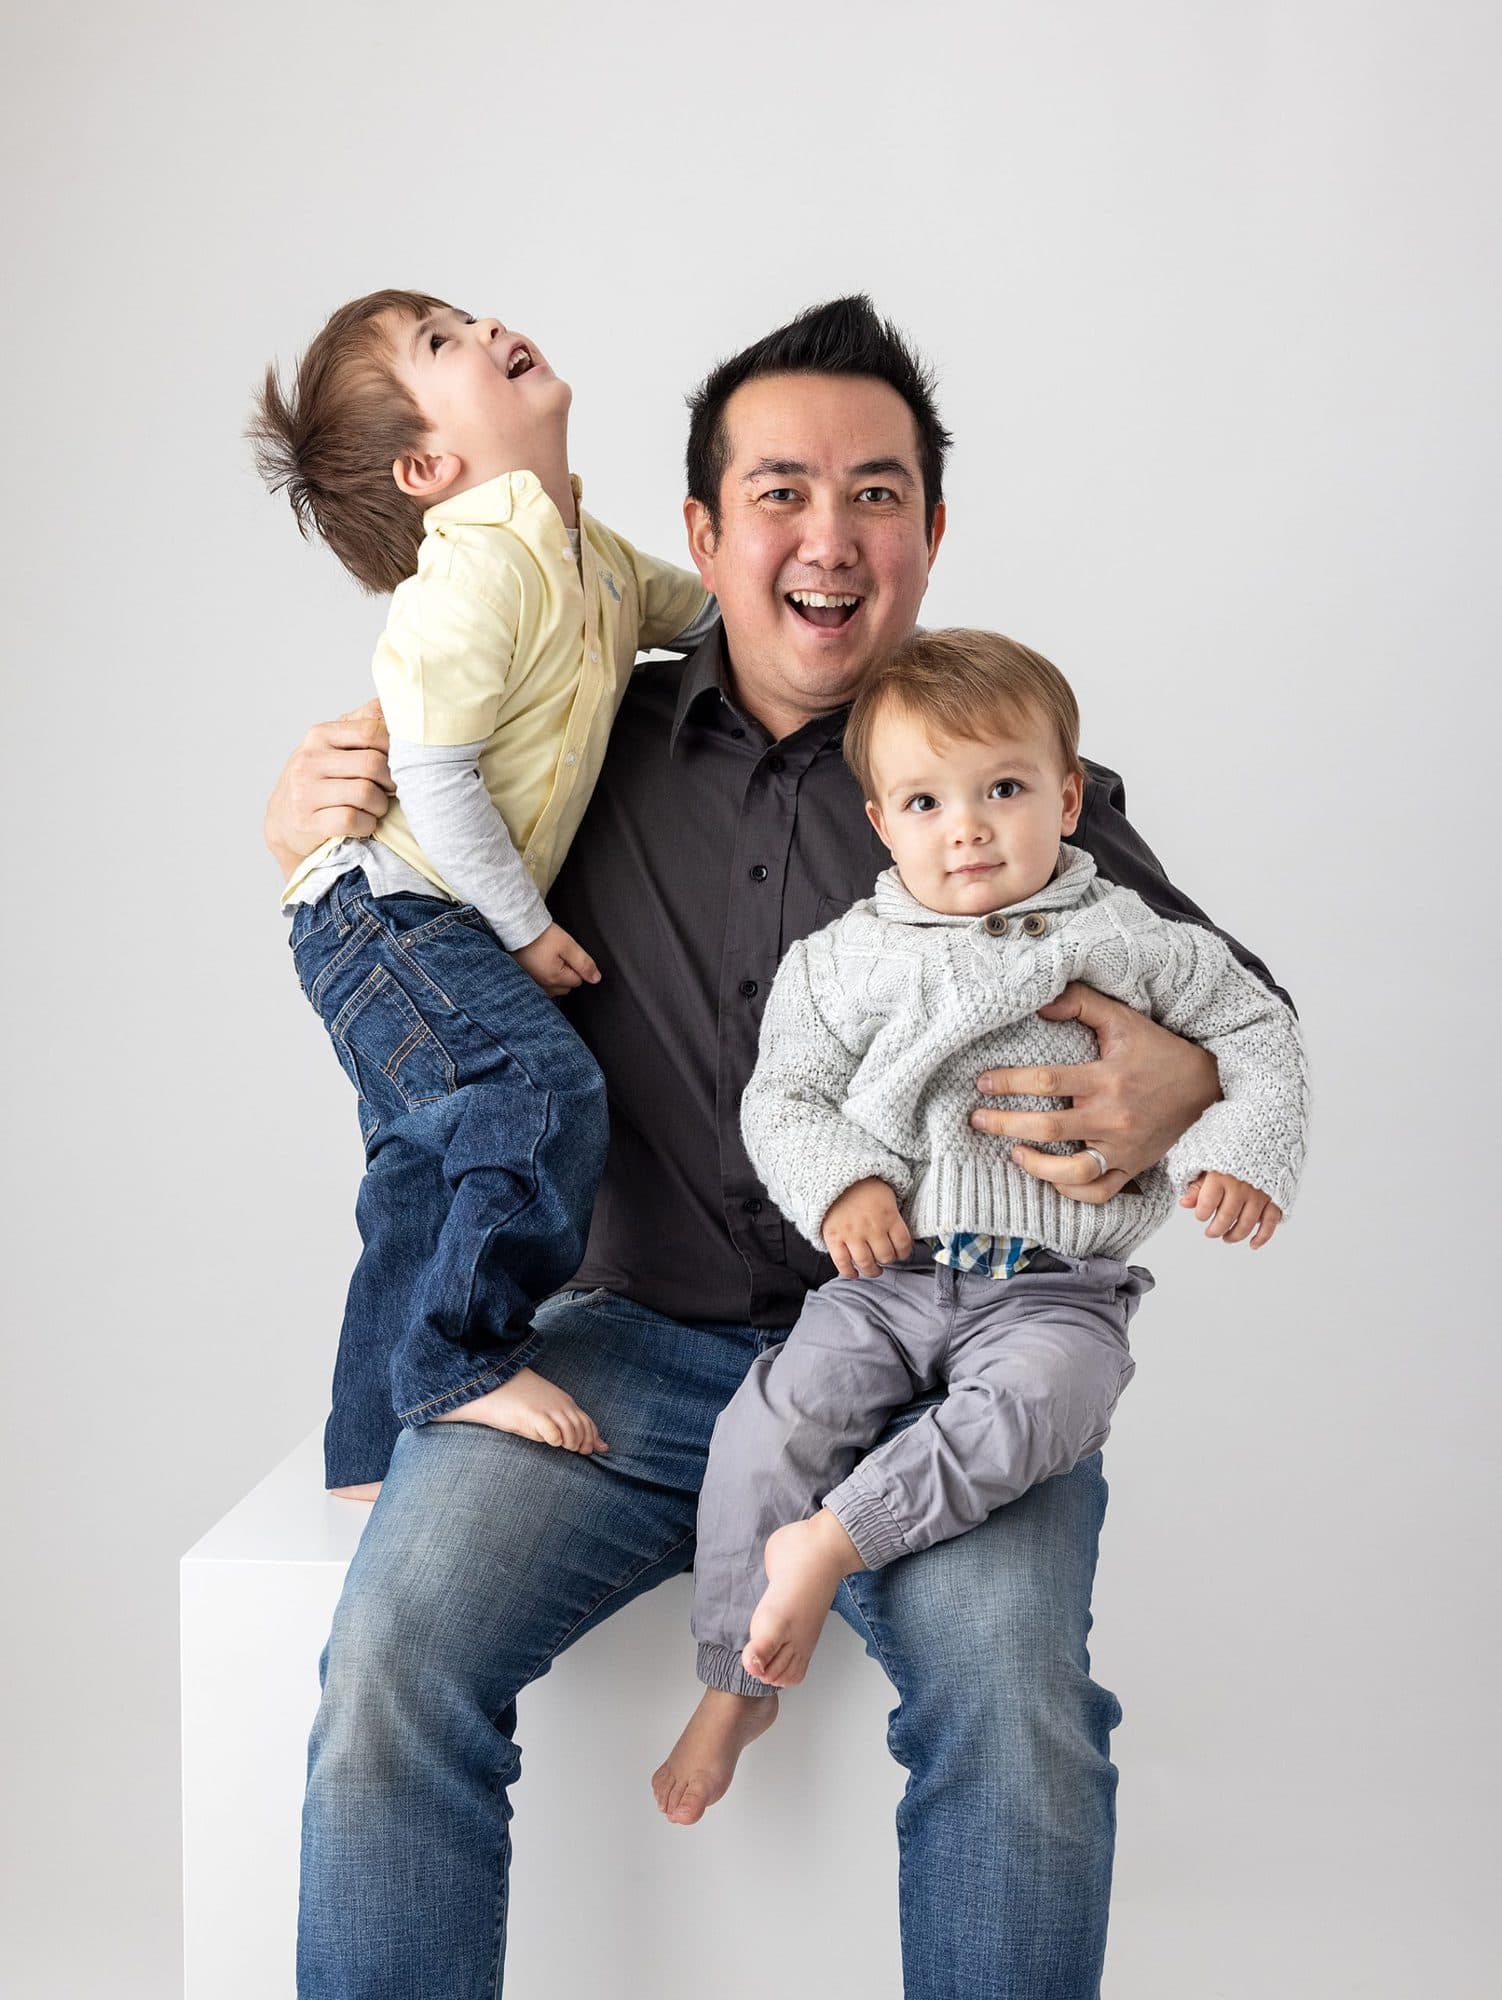 Two little boys and their Dad laughing during a studio family photoshoot with a white background